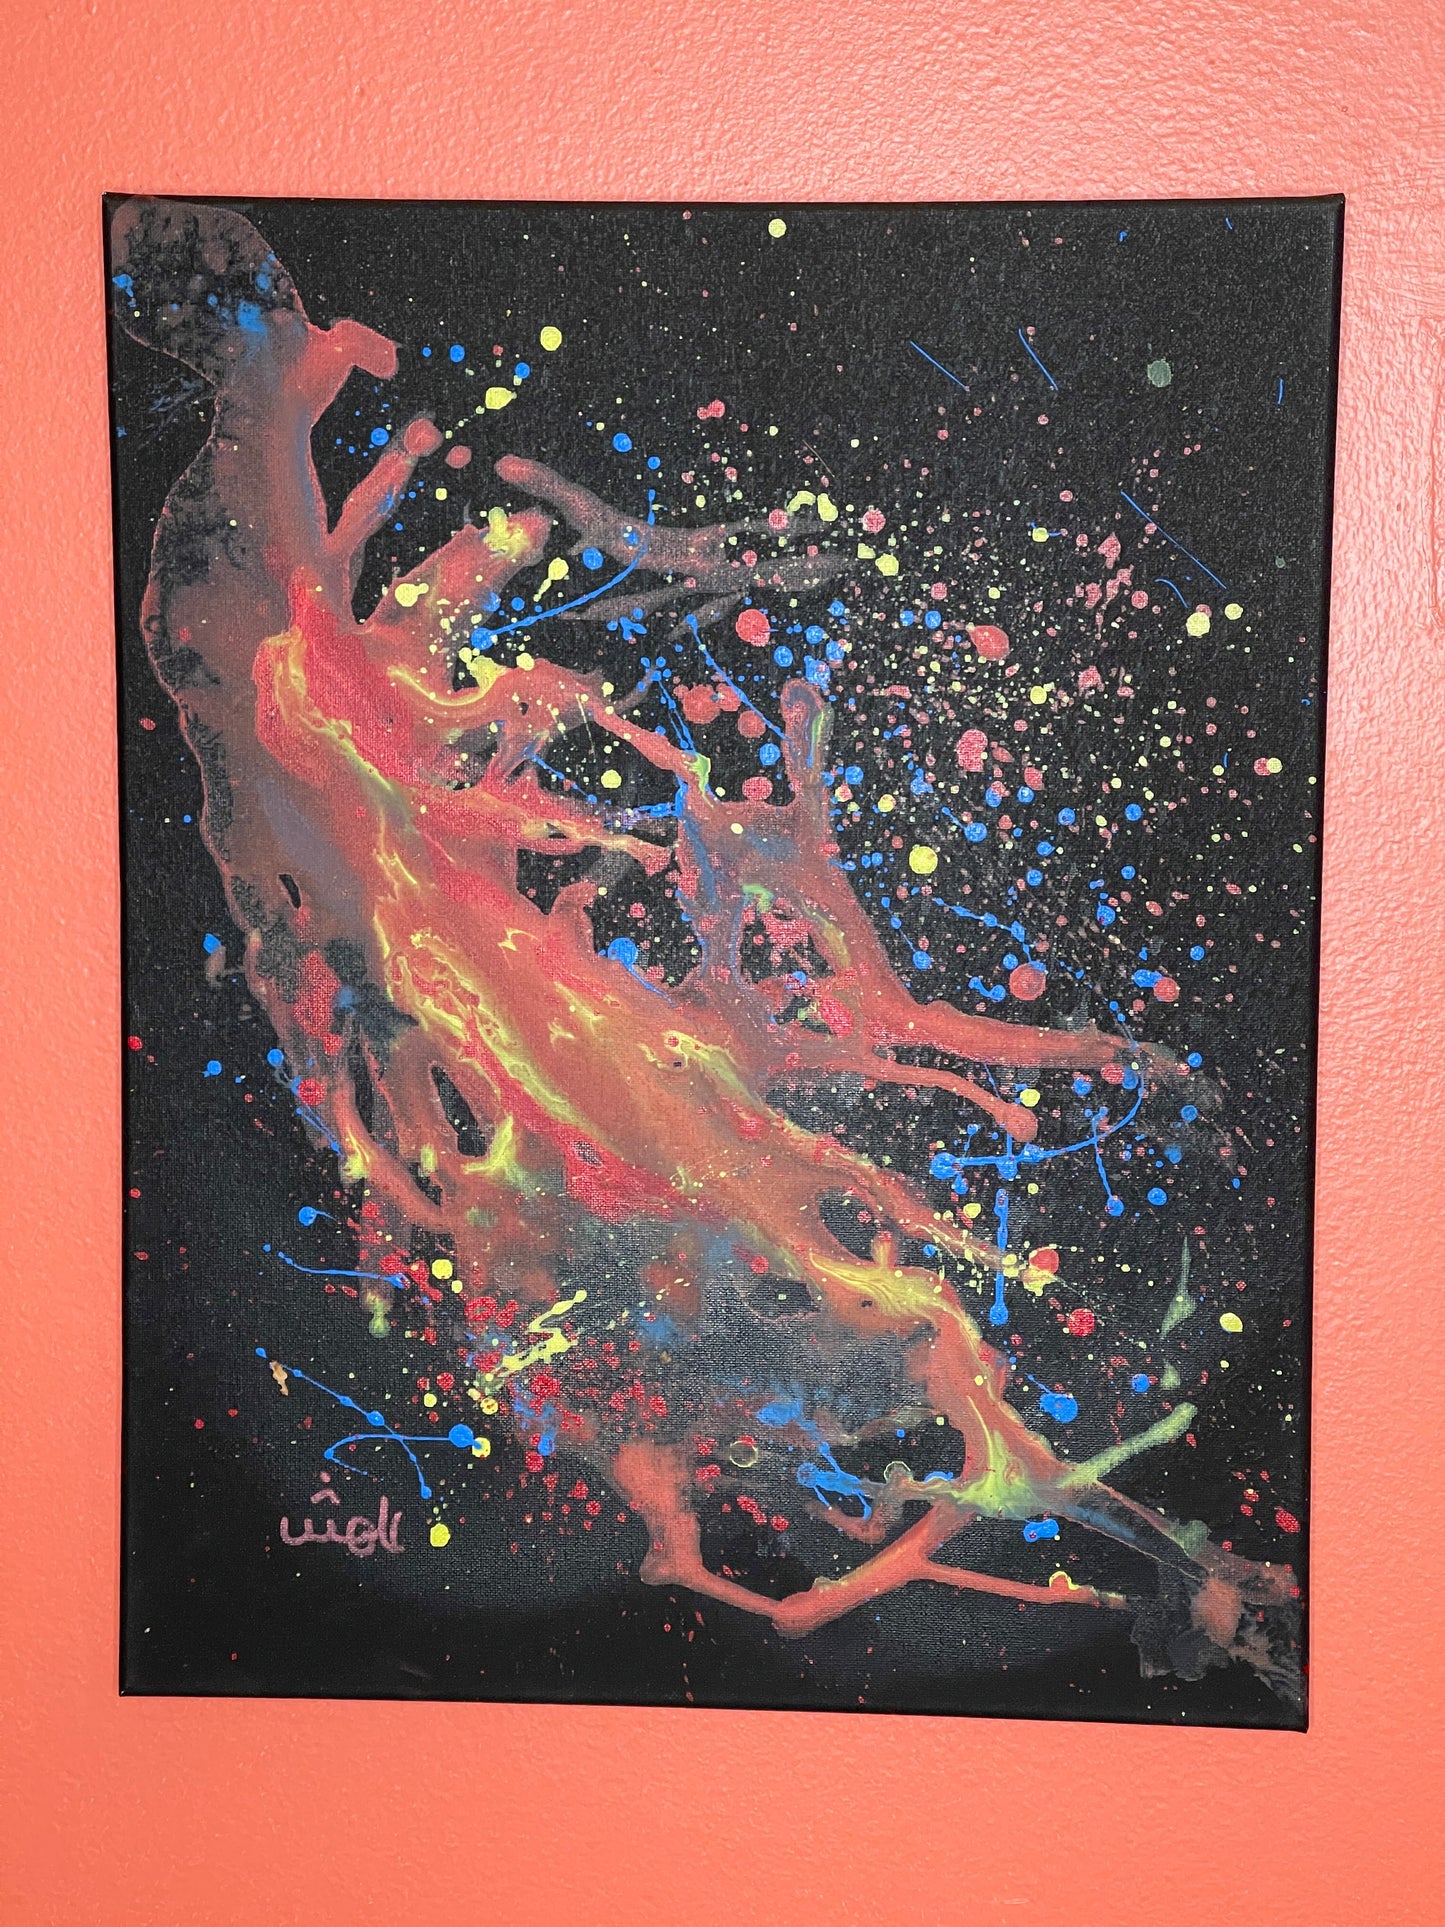 Tonight as it gets dark, go outside and look at the night skies. There you will see glimmers of lights and hope insuring us that we are not alone in this universe. So continue your journey and move forward with all your strength.  This is an Original Acrylic on Canvas design by Shahla Rahimi Reynolds.  This painting is one of the pieces in the Galaxies Collection and it  is 20" H x 16" W. 